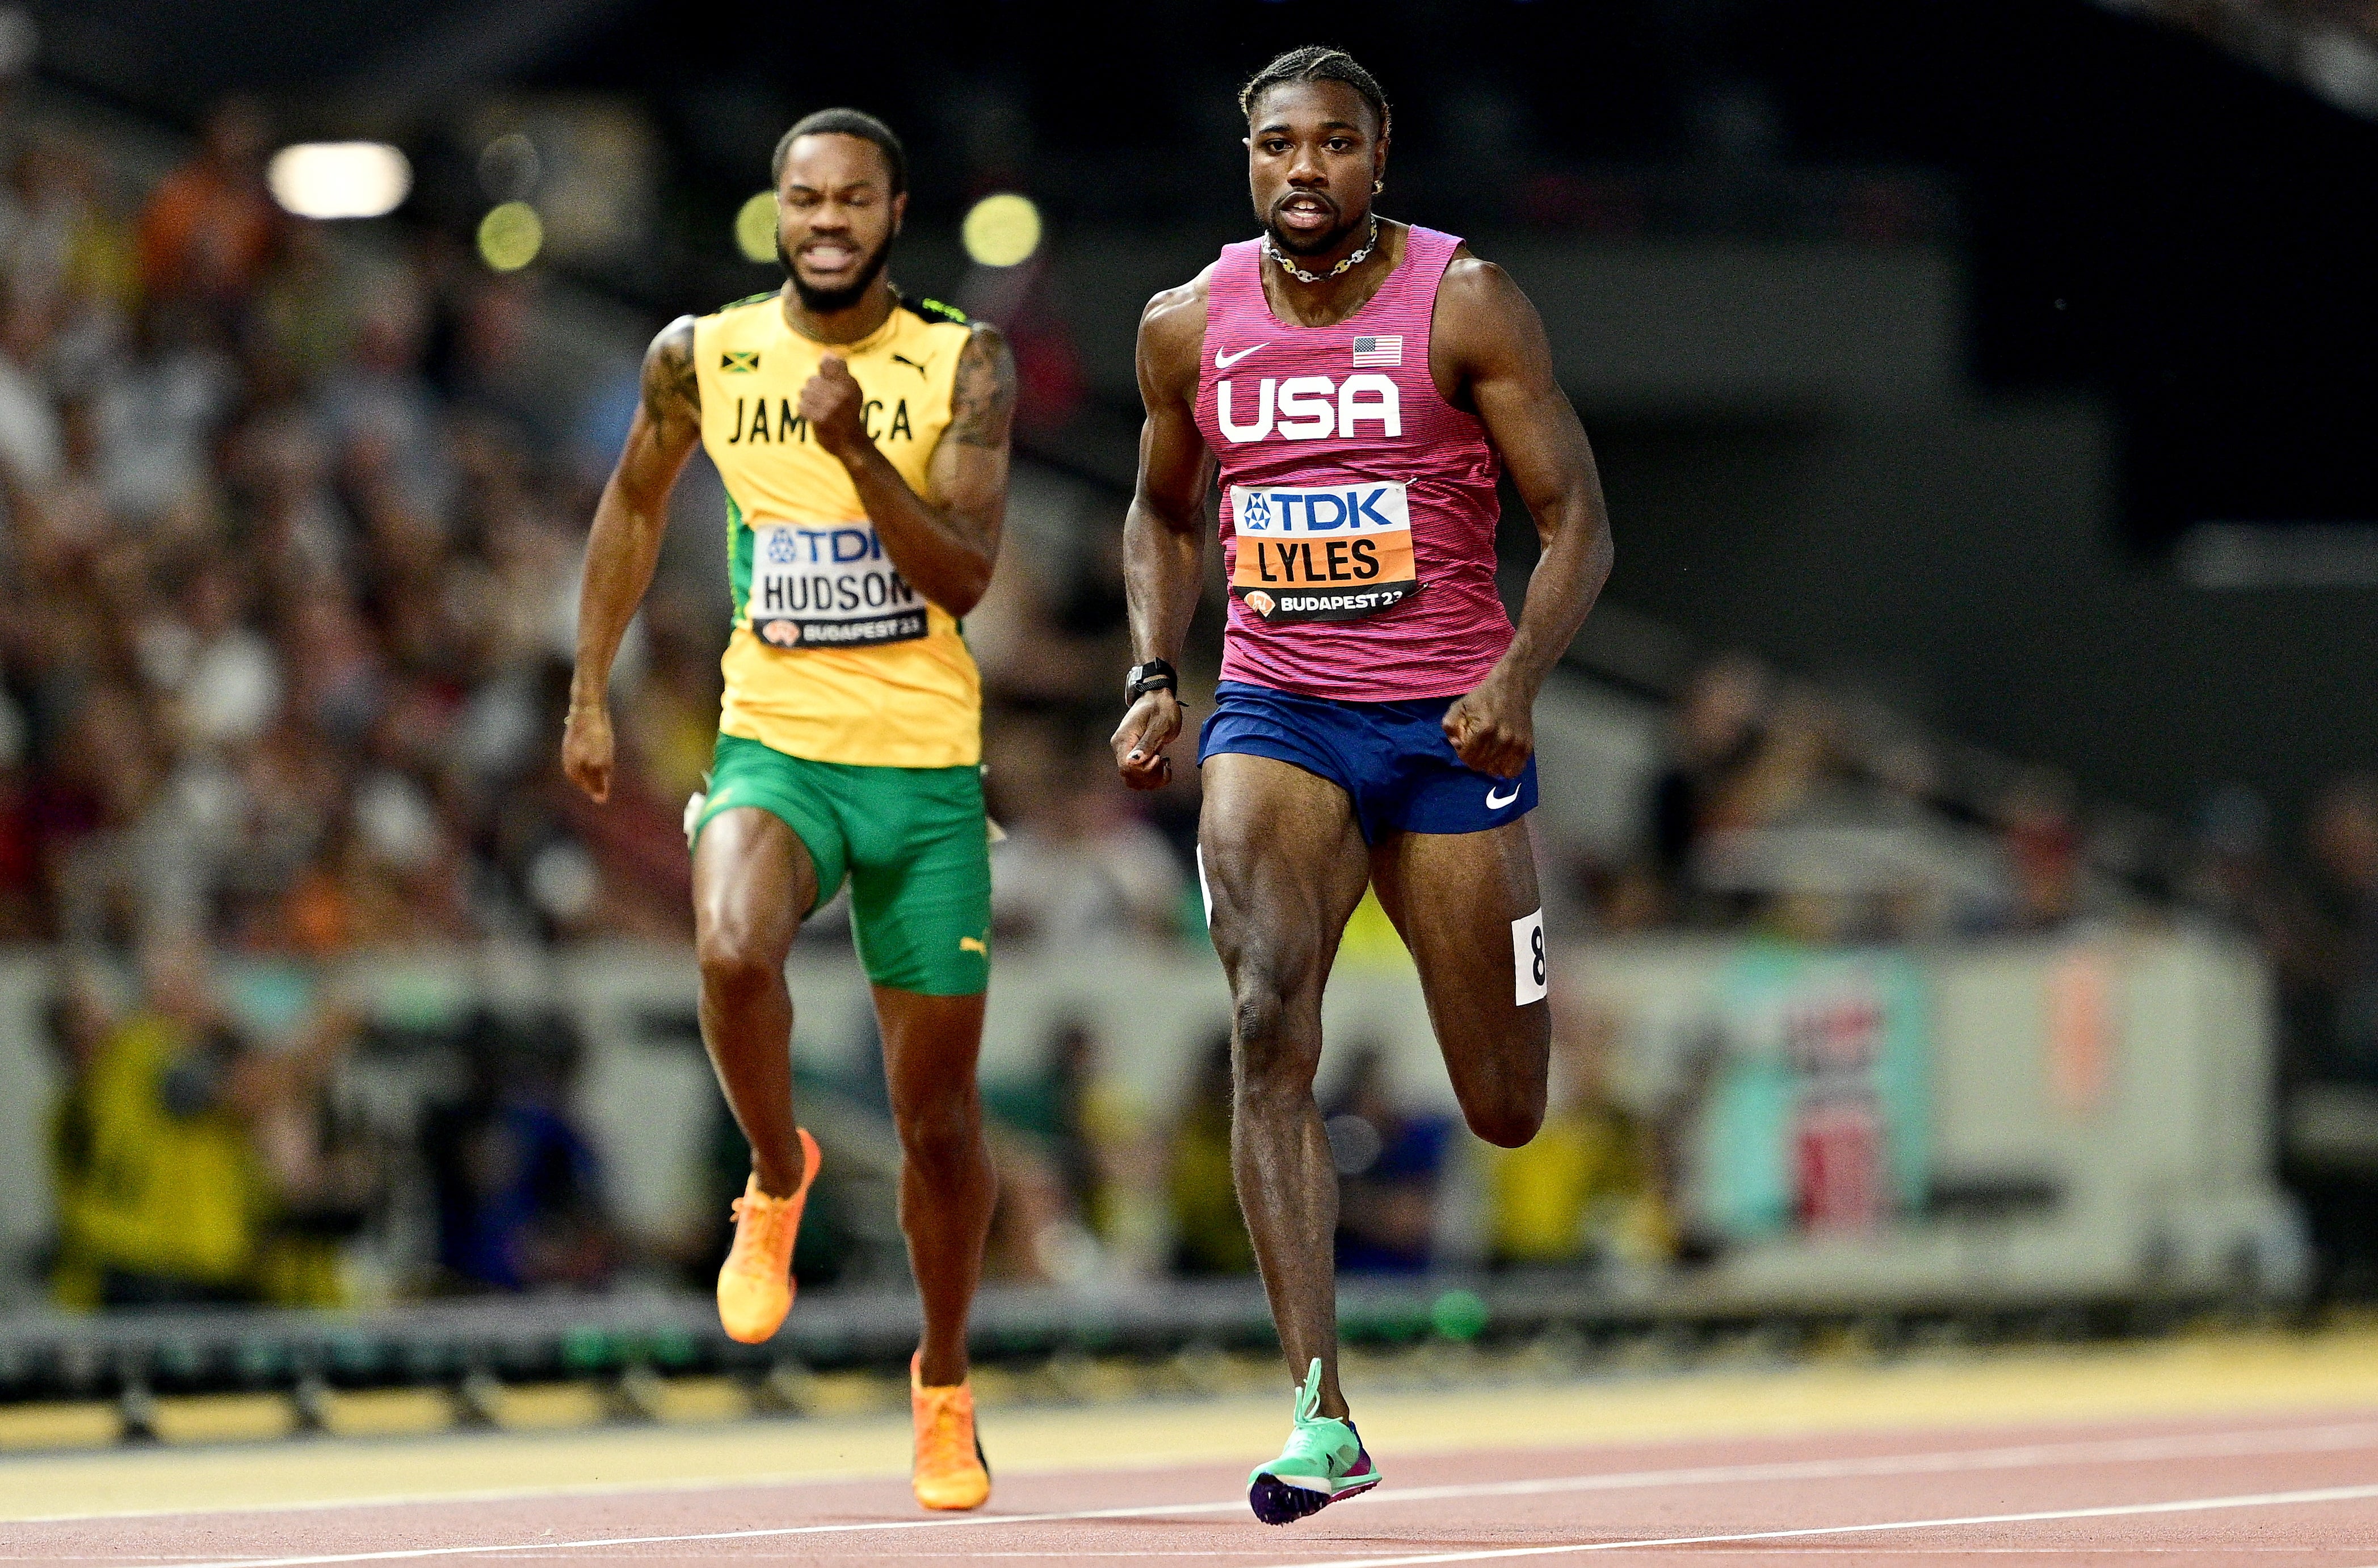 Noah Lyles has been criticised by his team mates